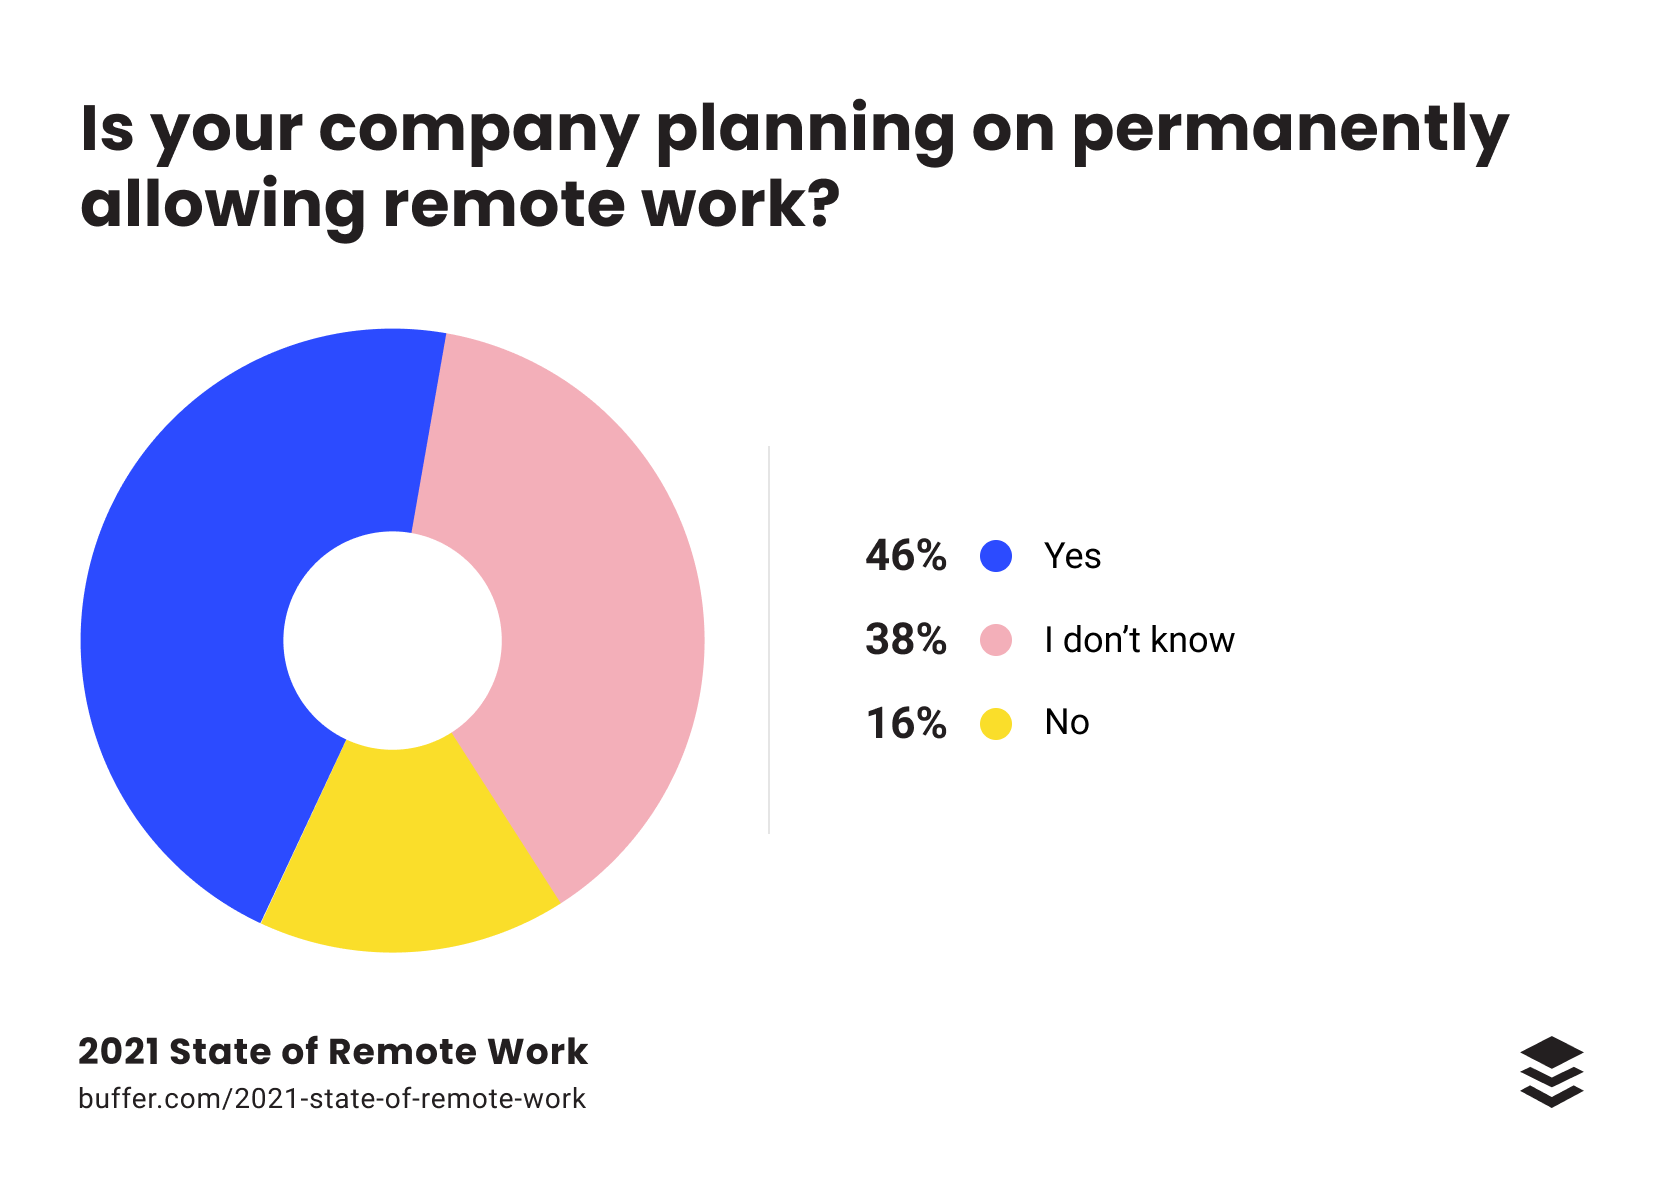 Companies with permanent remote work